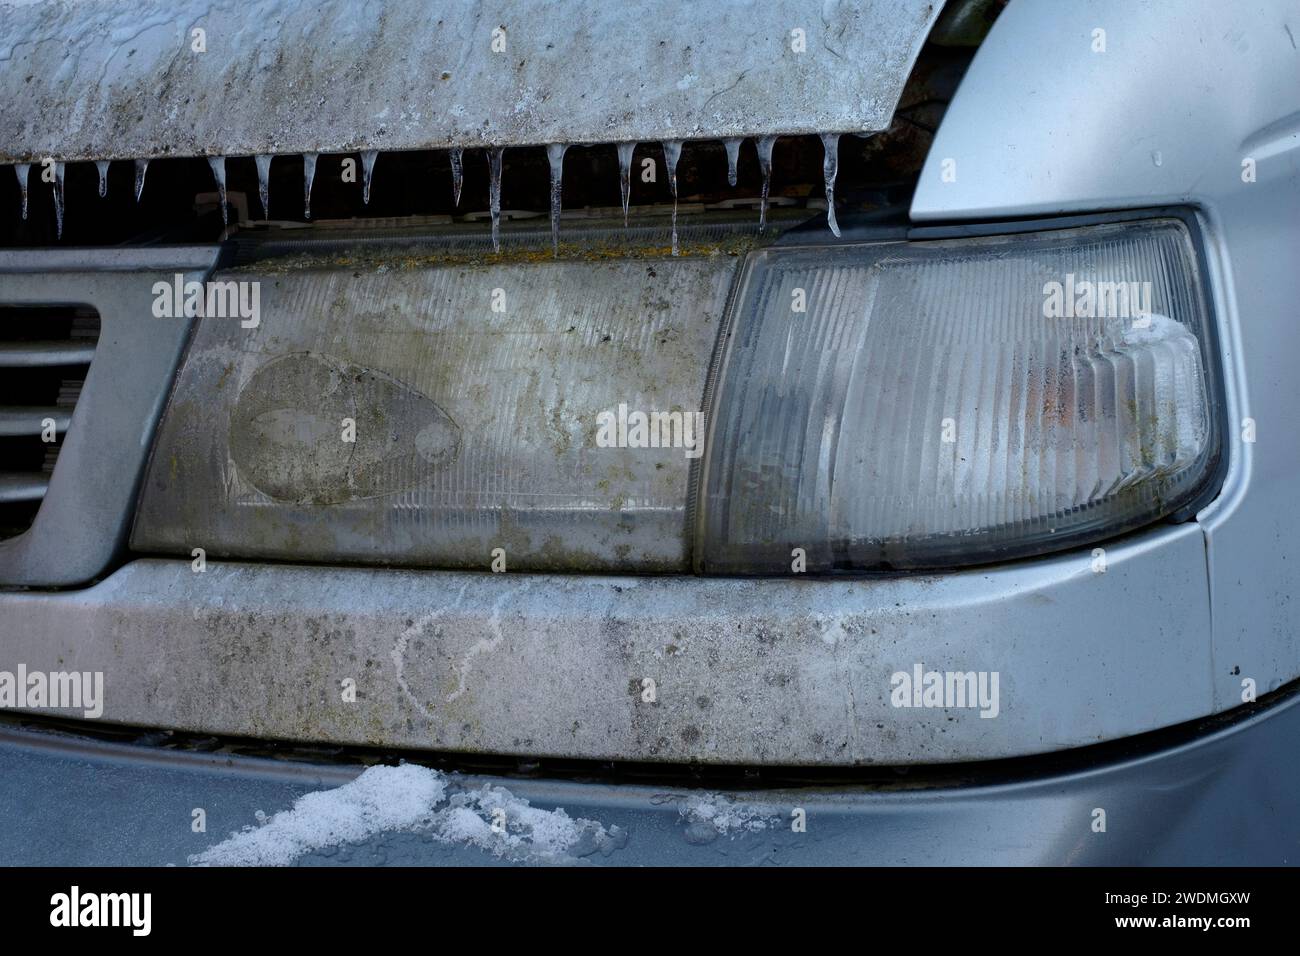 filthy dirty unwashed headlight on unkempt van illegal for road use Stock Photo